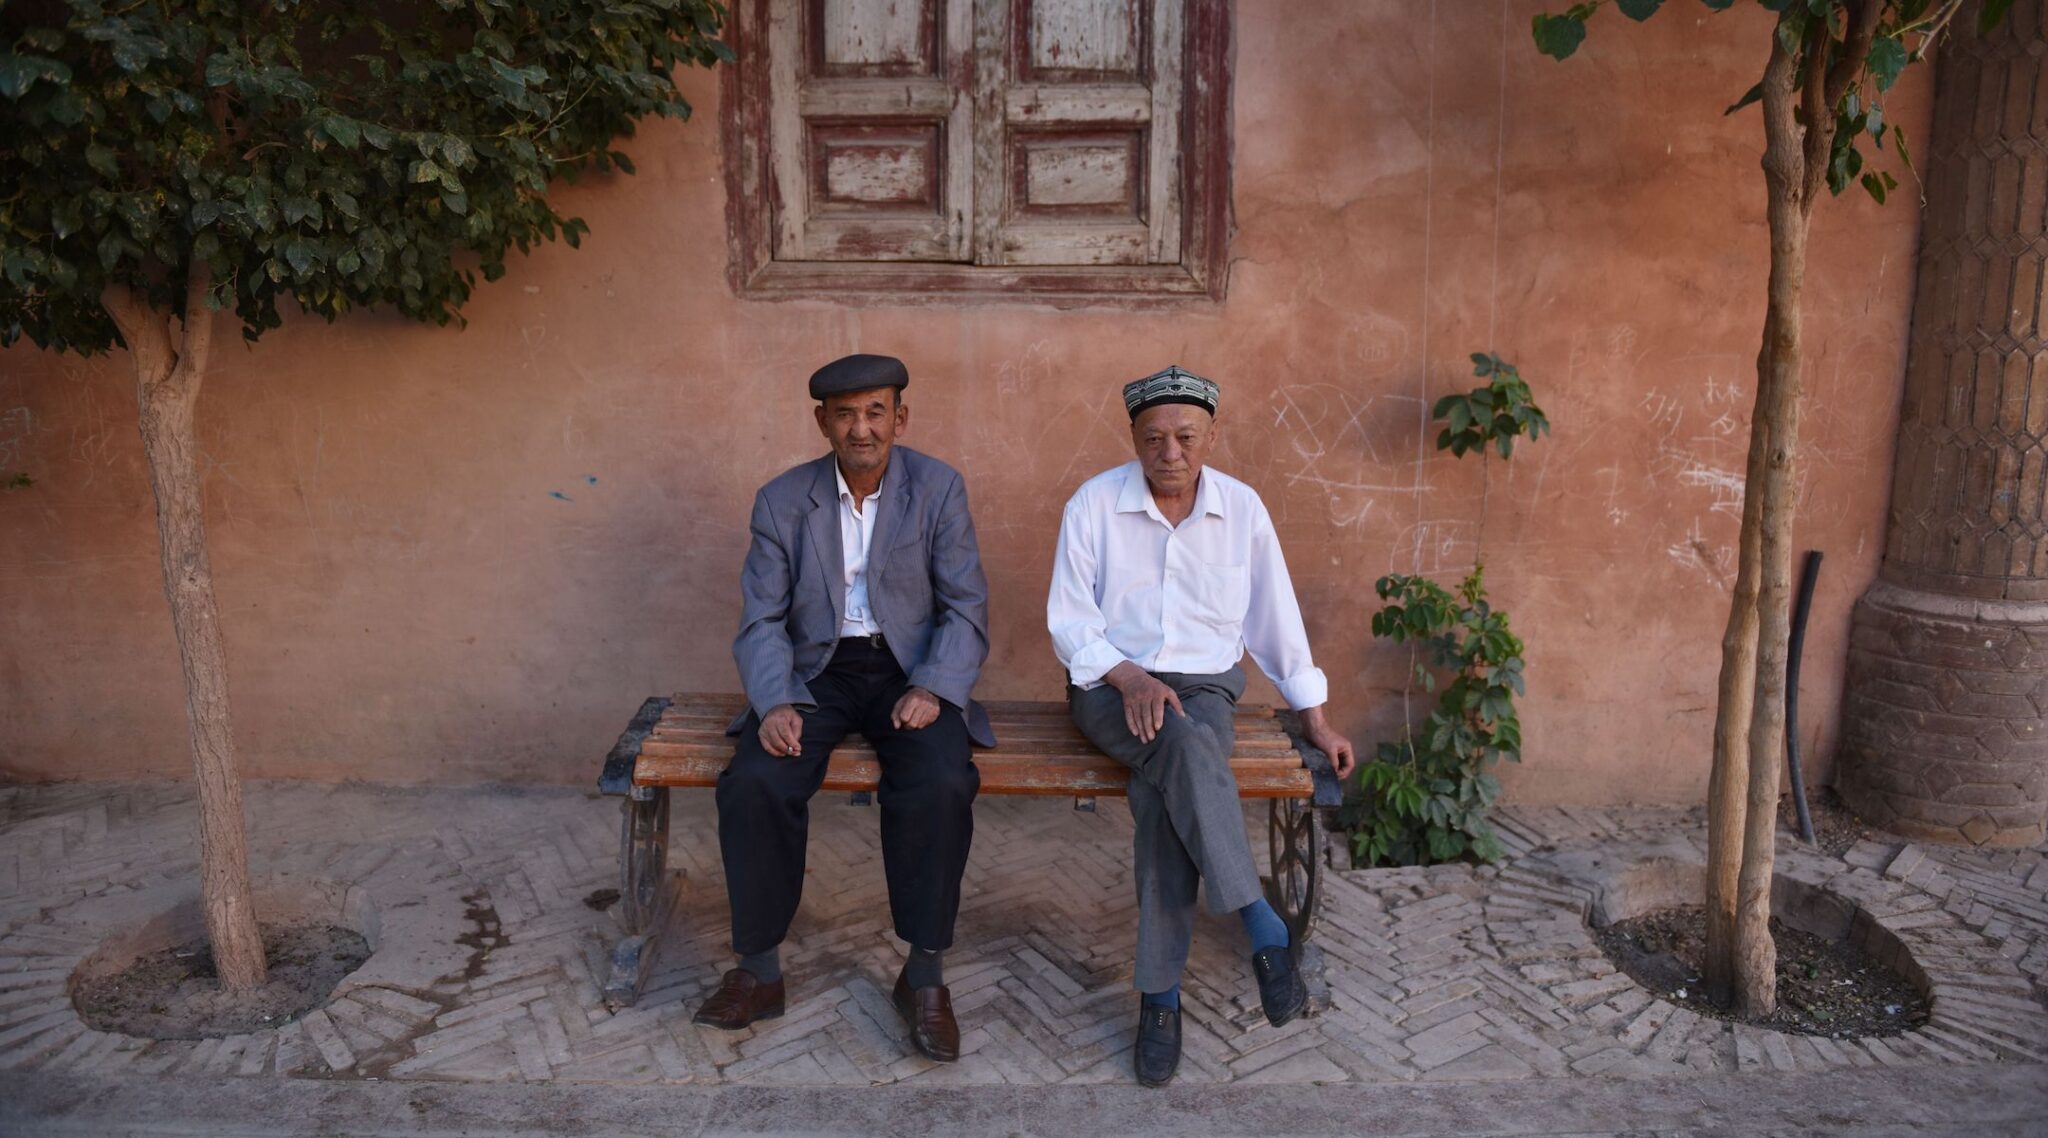 Uighur men rest in the restored old city area of Kashgar, in China’s western Xinjiang region, in 2019. (Greg Baker/AFP via Getty Images)